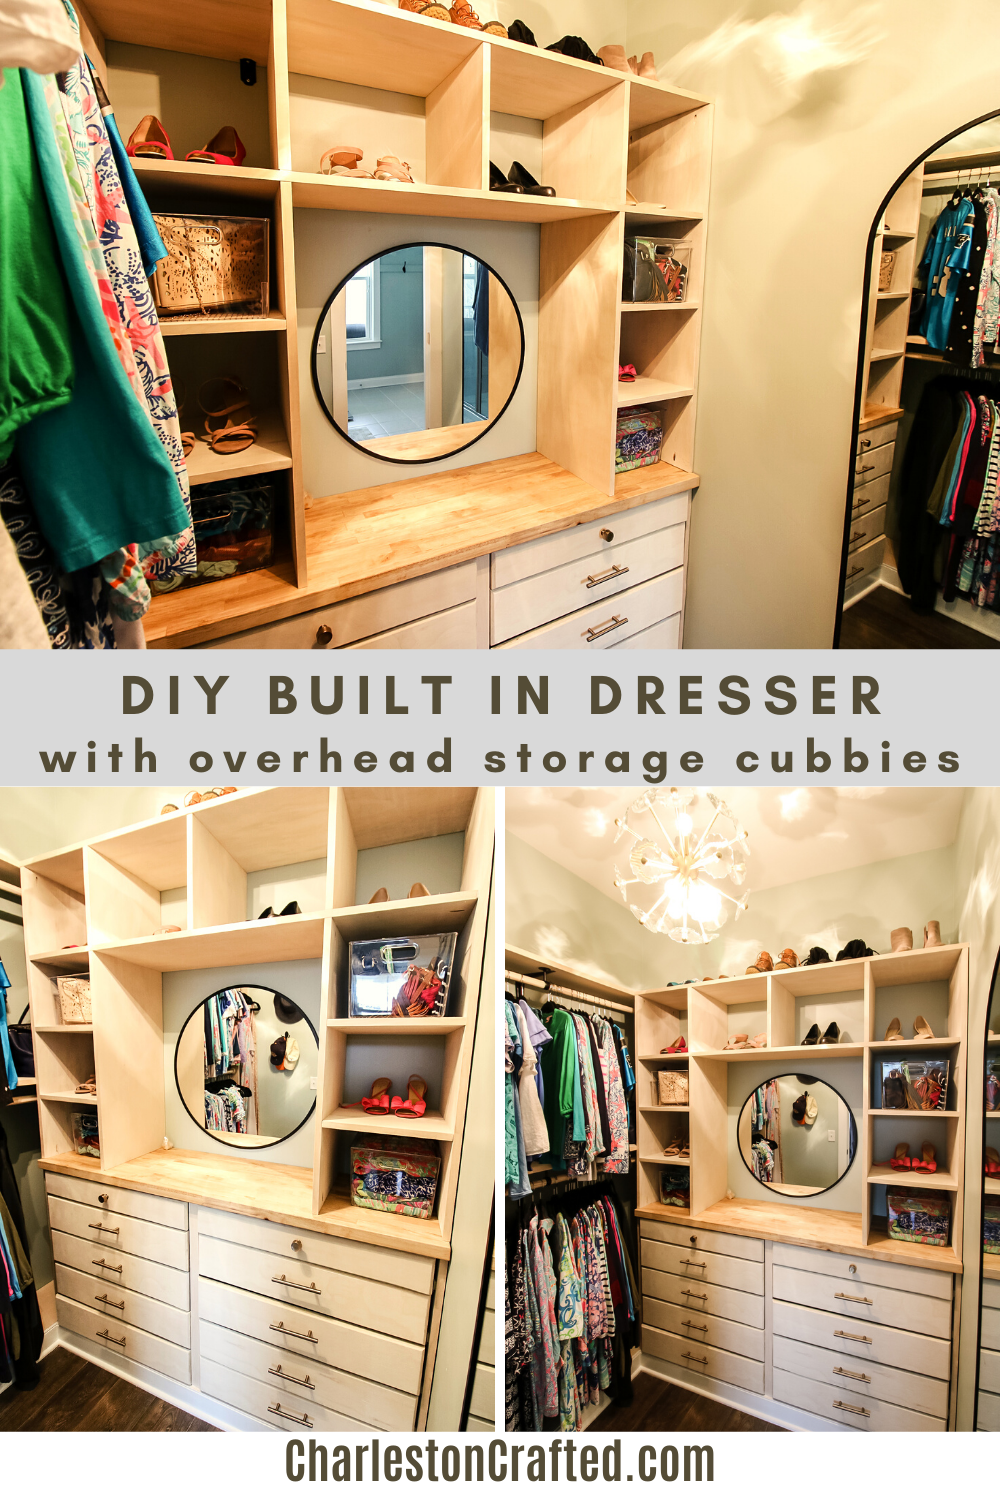 Diy Built In Dresser With Cubbies For A Walk Closet